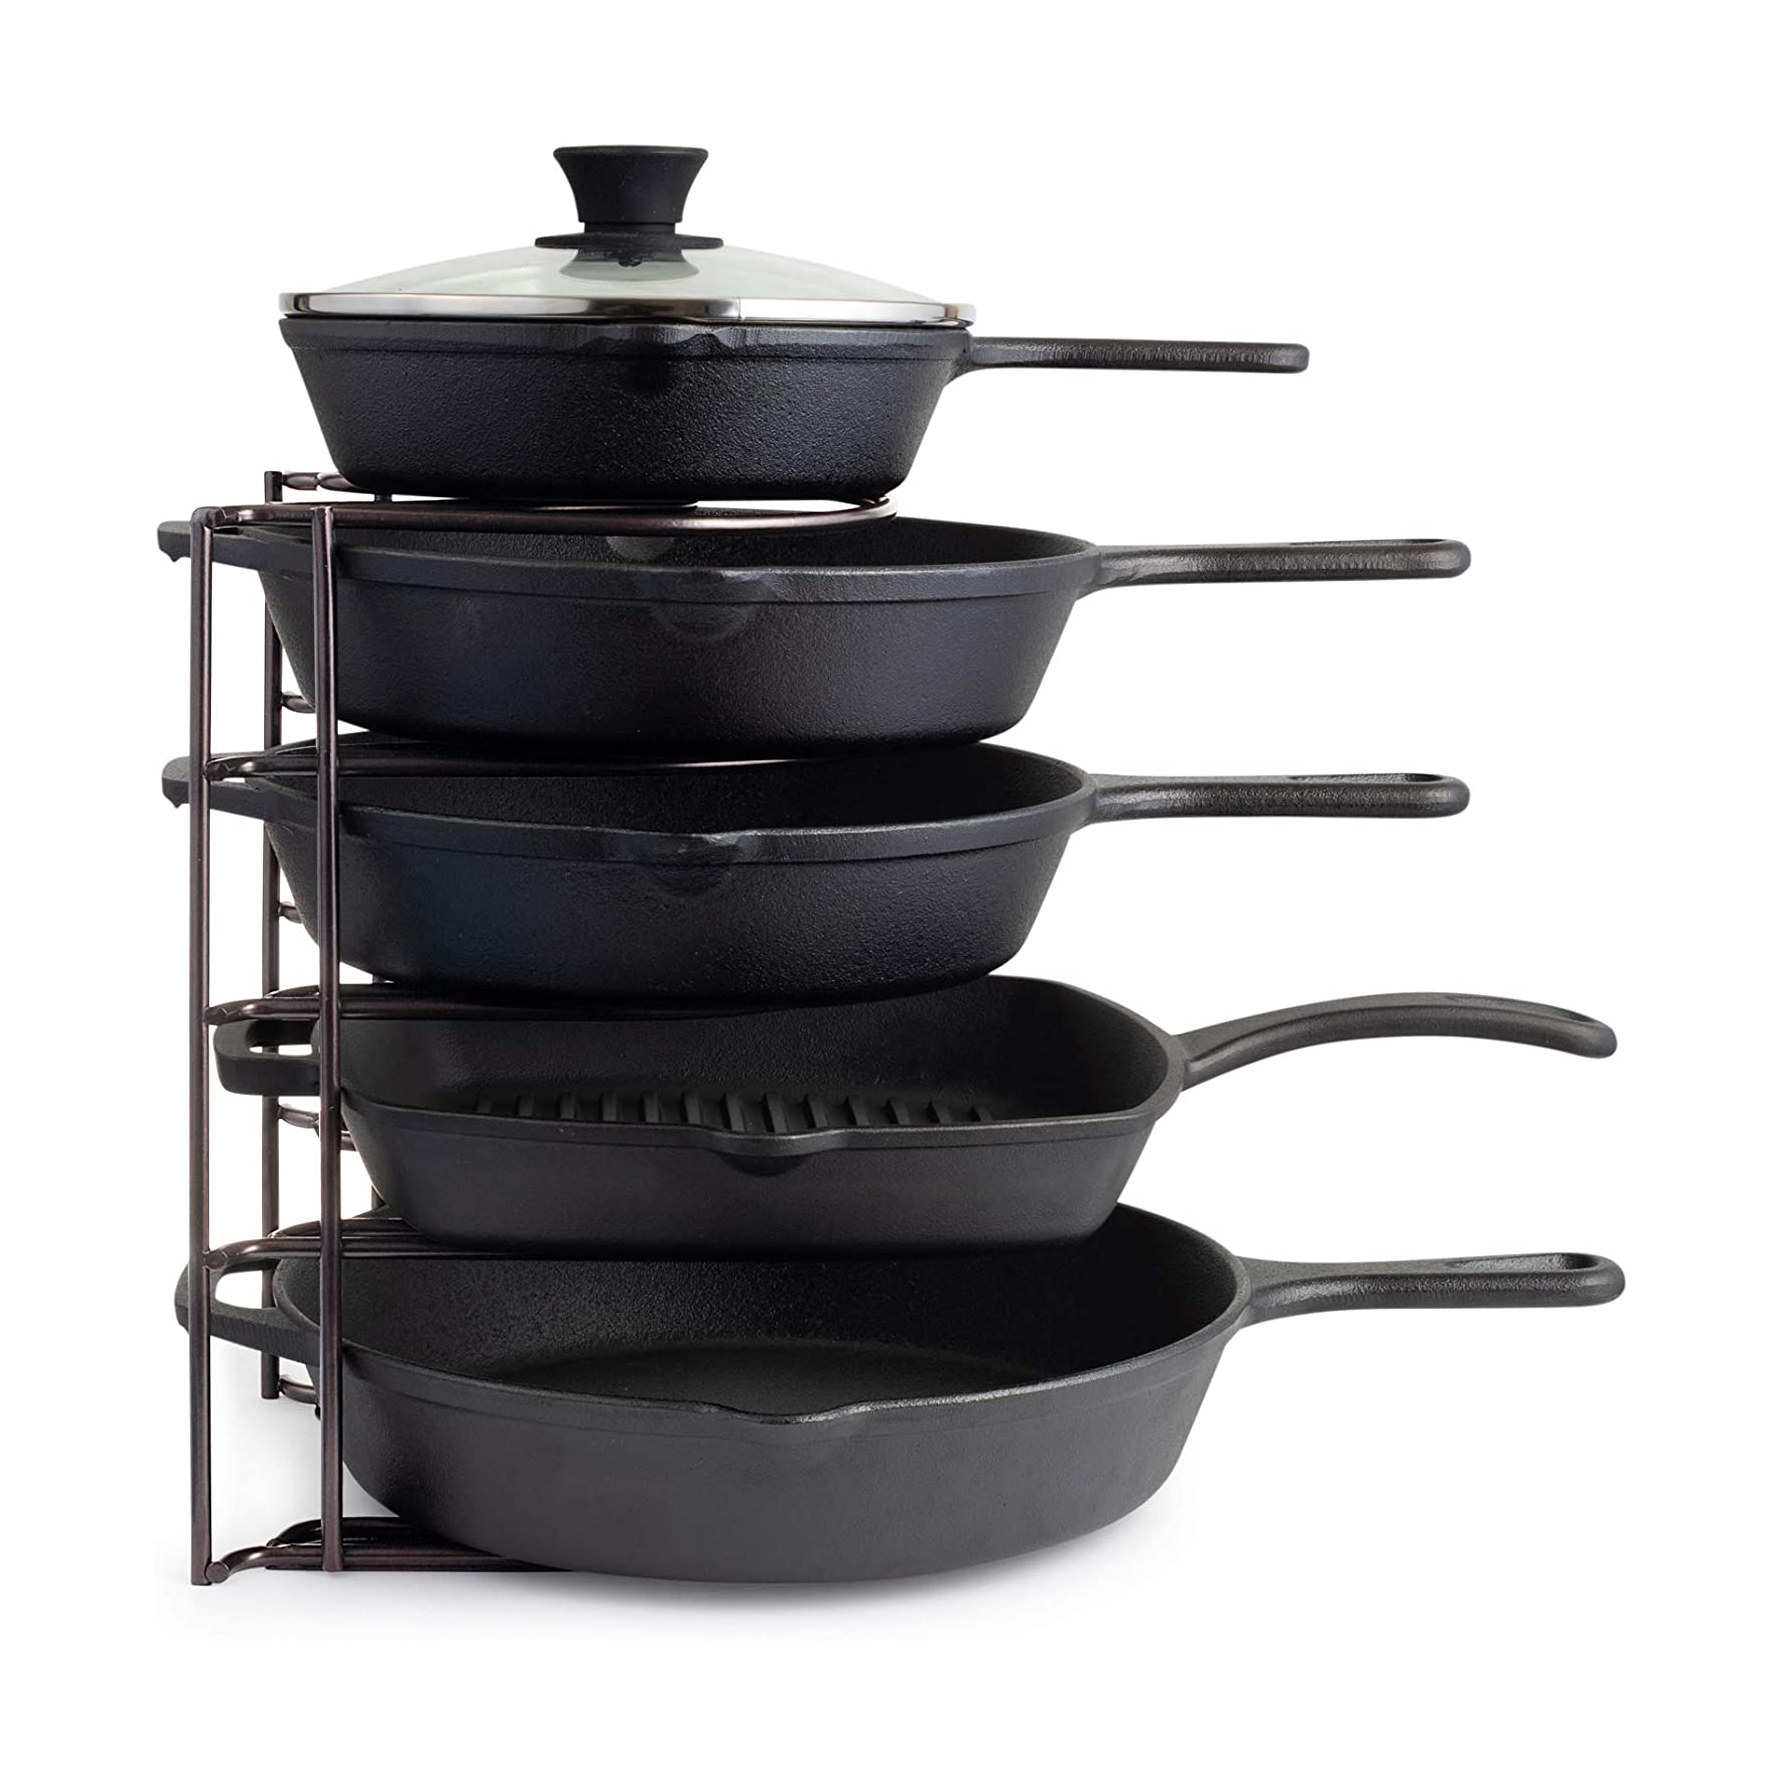 five cast iron pans; one on each tier of the cuisinel pan organizer